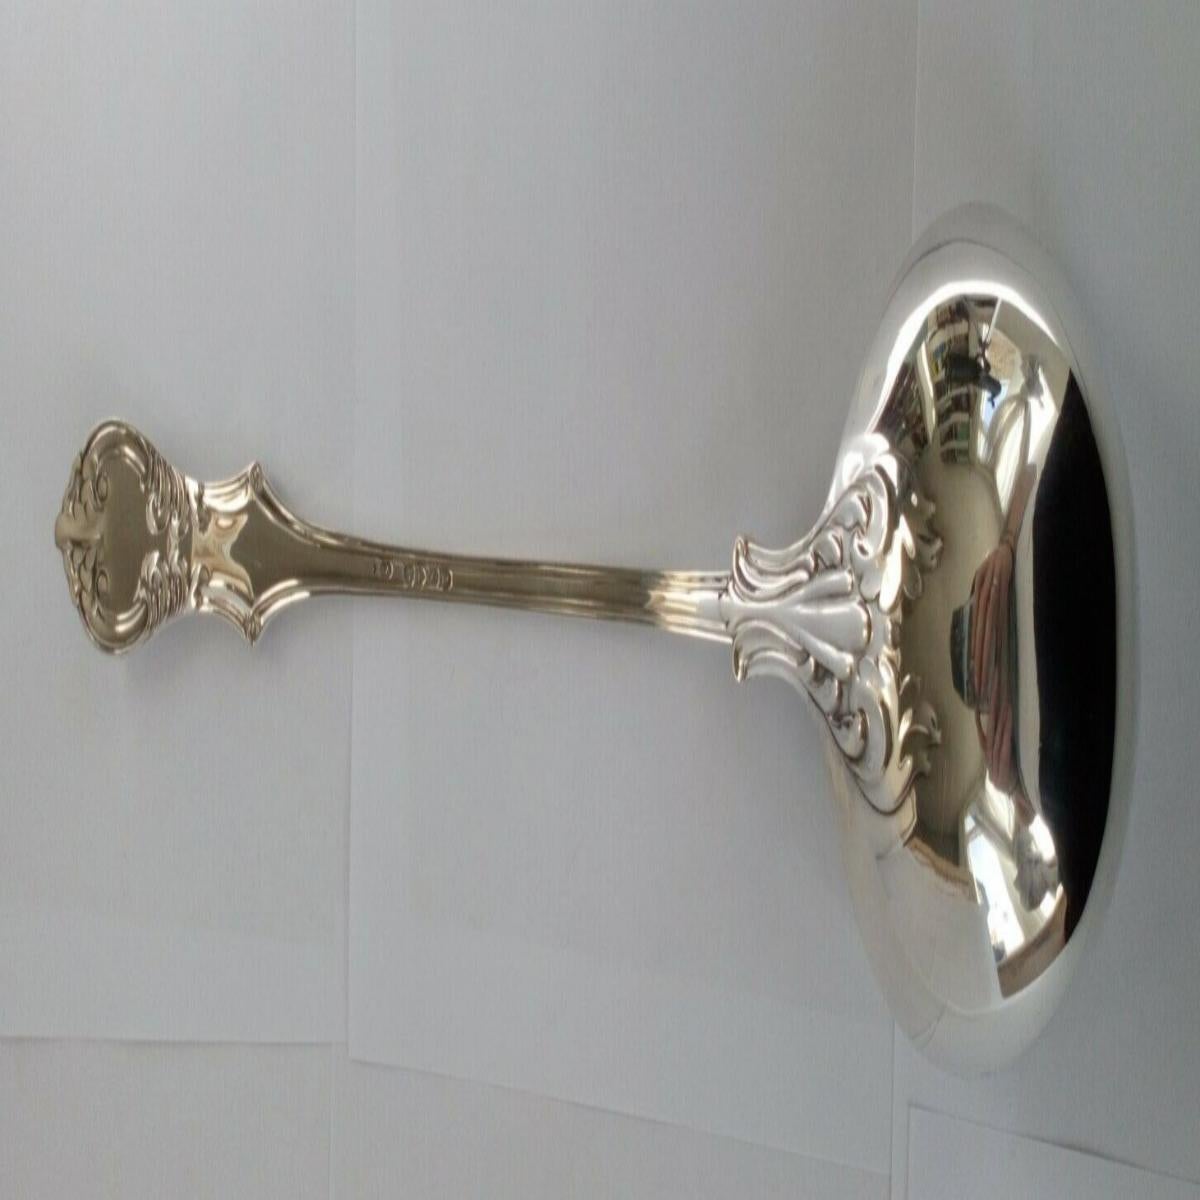 Victorian Sterling Silver Ladle Made by Chawner & Co in London in 1859

In good condition, this is a lovely piece. The bowl is engraved with, “In gratitude. PASACH 1952. Rosie Rayman.” Hallmarked: Made by Chawner & Co (George William Adams) in